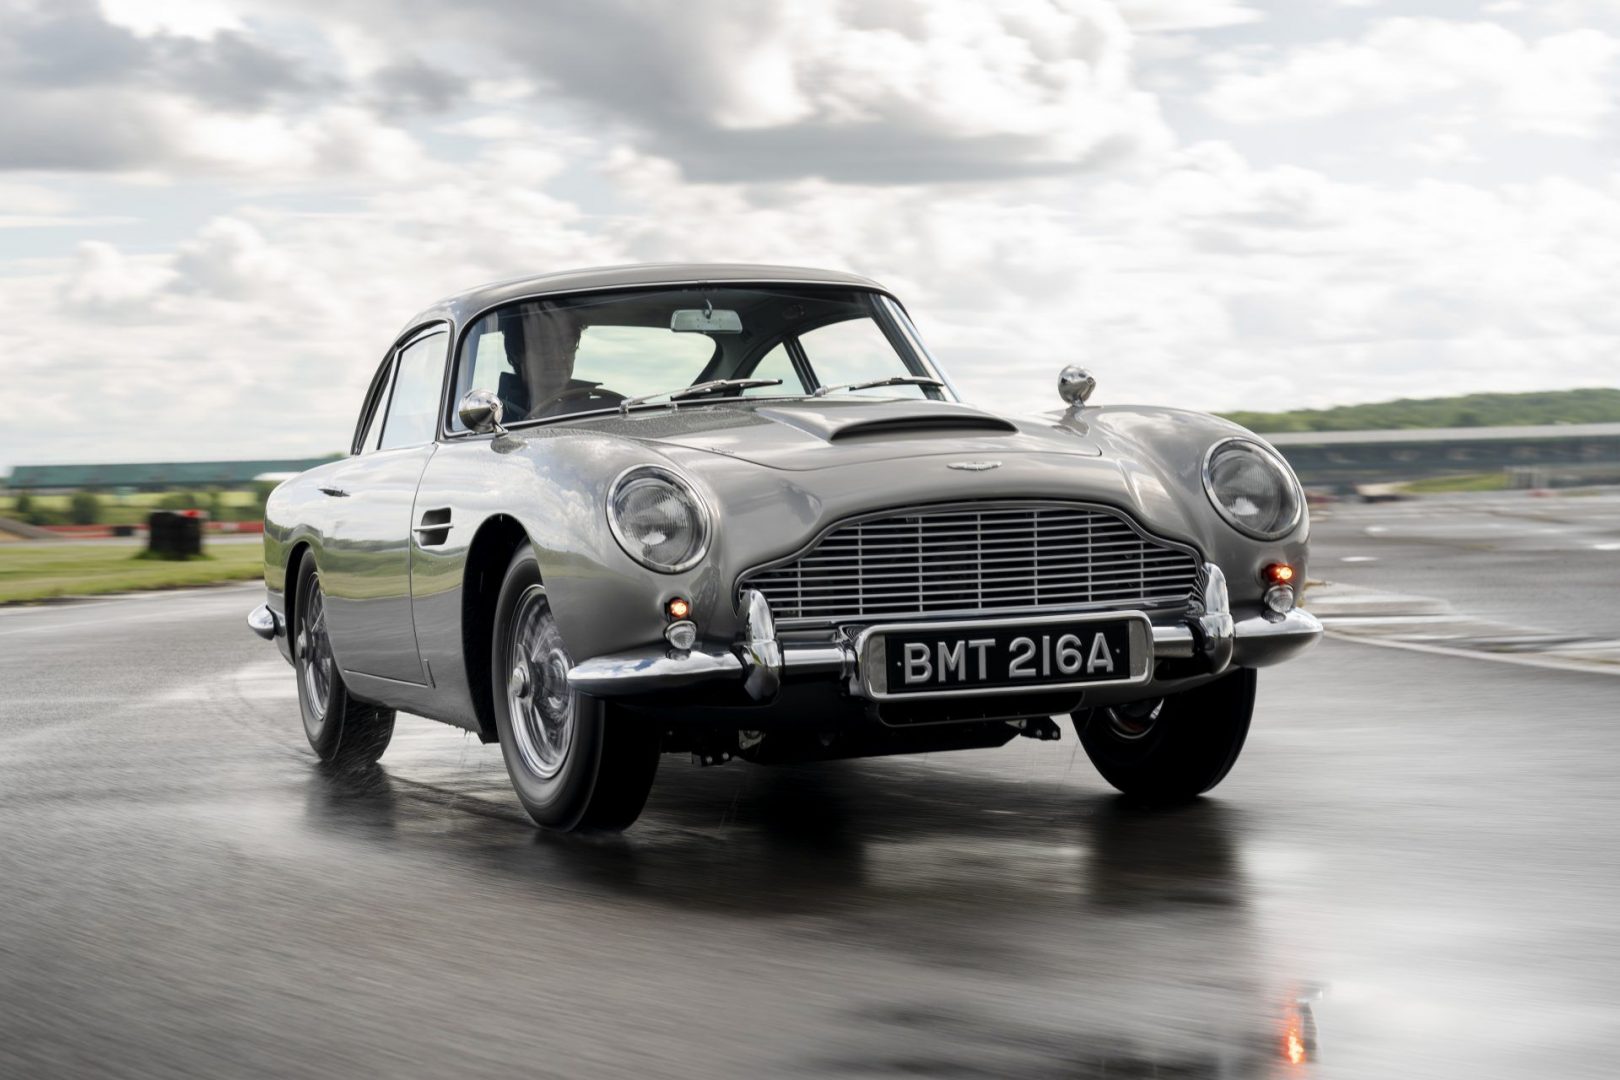 Aston Martin DB5 – History In The Remaking